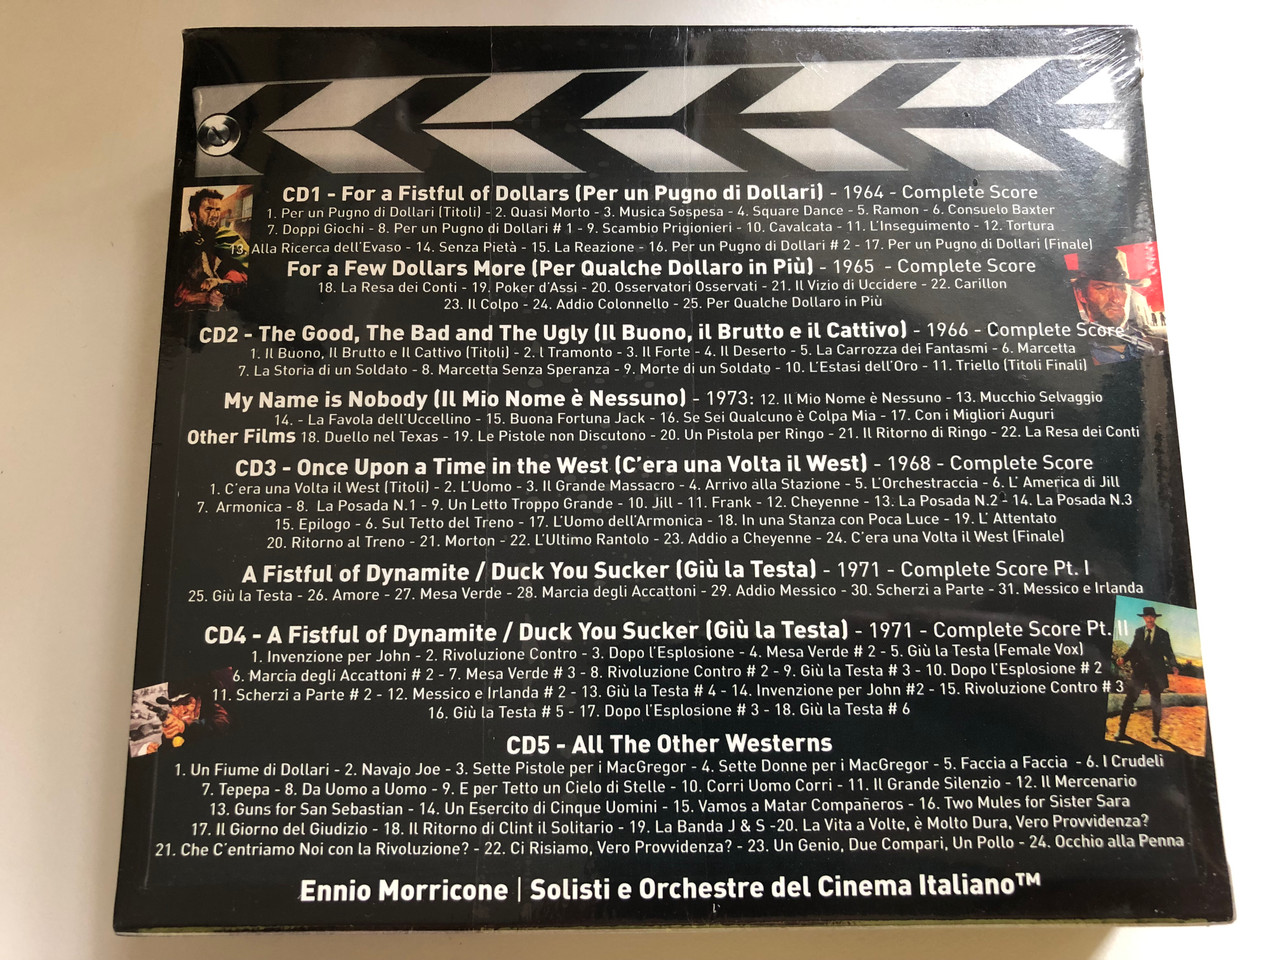 https://cdn10.bigcommerce.com/s-62bdpkt7pb/products/0/images/227217/Ennio_Morricone_Complete_Spaghetti_Westerns_120_Tracks_From_-_A_Fistful_Of_Dollars_The_Good_The_Bad_And_The_Ugly_Once_Upon_A_Time_In_The_West_Fistful_Of_Fynamite_Recording_Arts_5x_Au__24135.1652244809.1280.1280.JPG?c=2&_gl=1*1kwtvkt*_ga*MjA2NTIxMjE2MC4xNTkwNTEyNTMy*_ga_WS2VZYPC6G*MTY1MjI0MjQyNC4zOTAuMS4xNjUyMjQ0NDEwLjEz